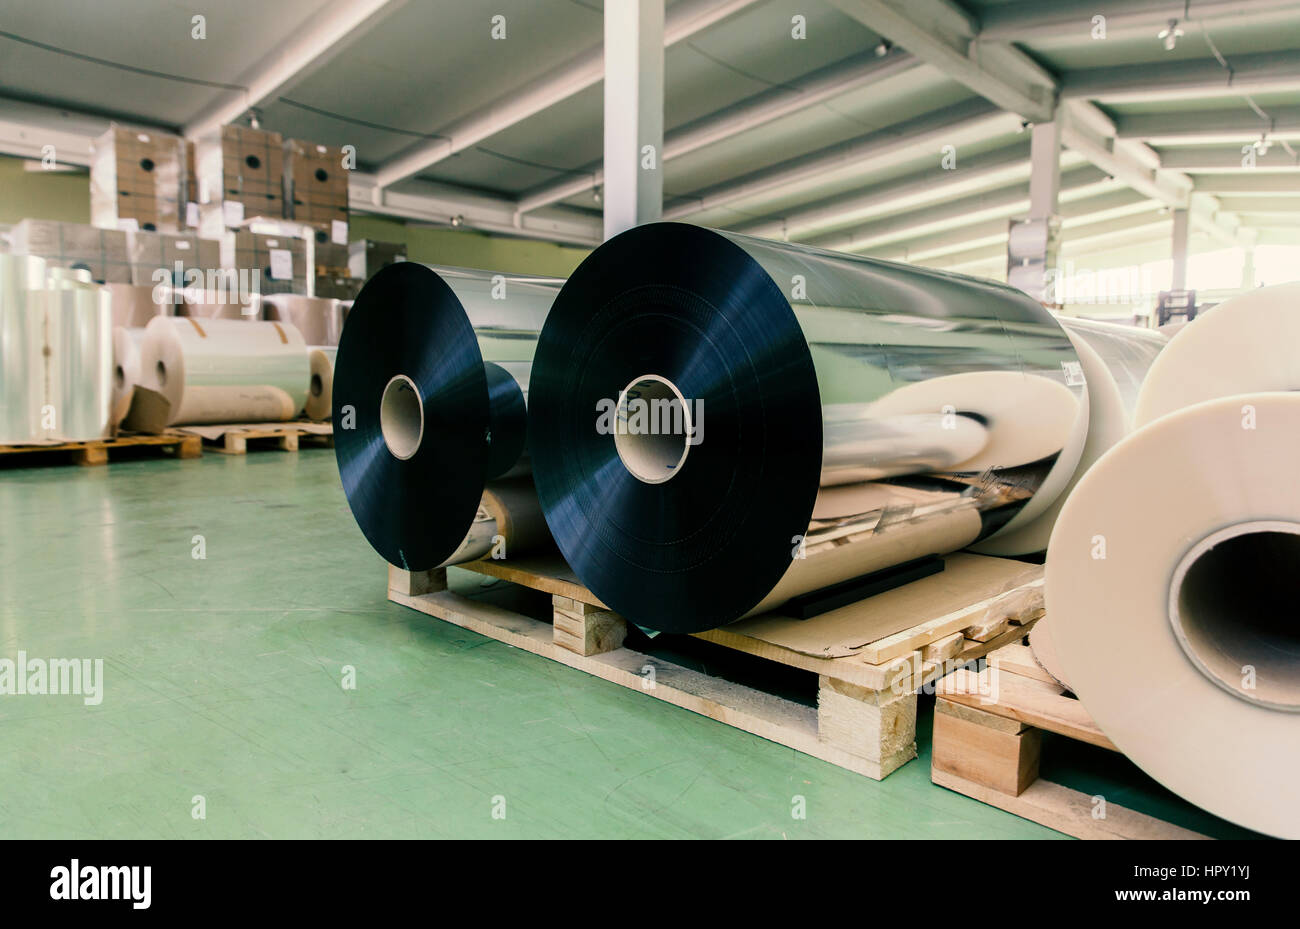 https://c8.alamy.com/comp/HPY1YJ/large-rolls-of-aluminum-foil-in-the-warehouse-HPY1YJ.jpg